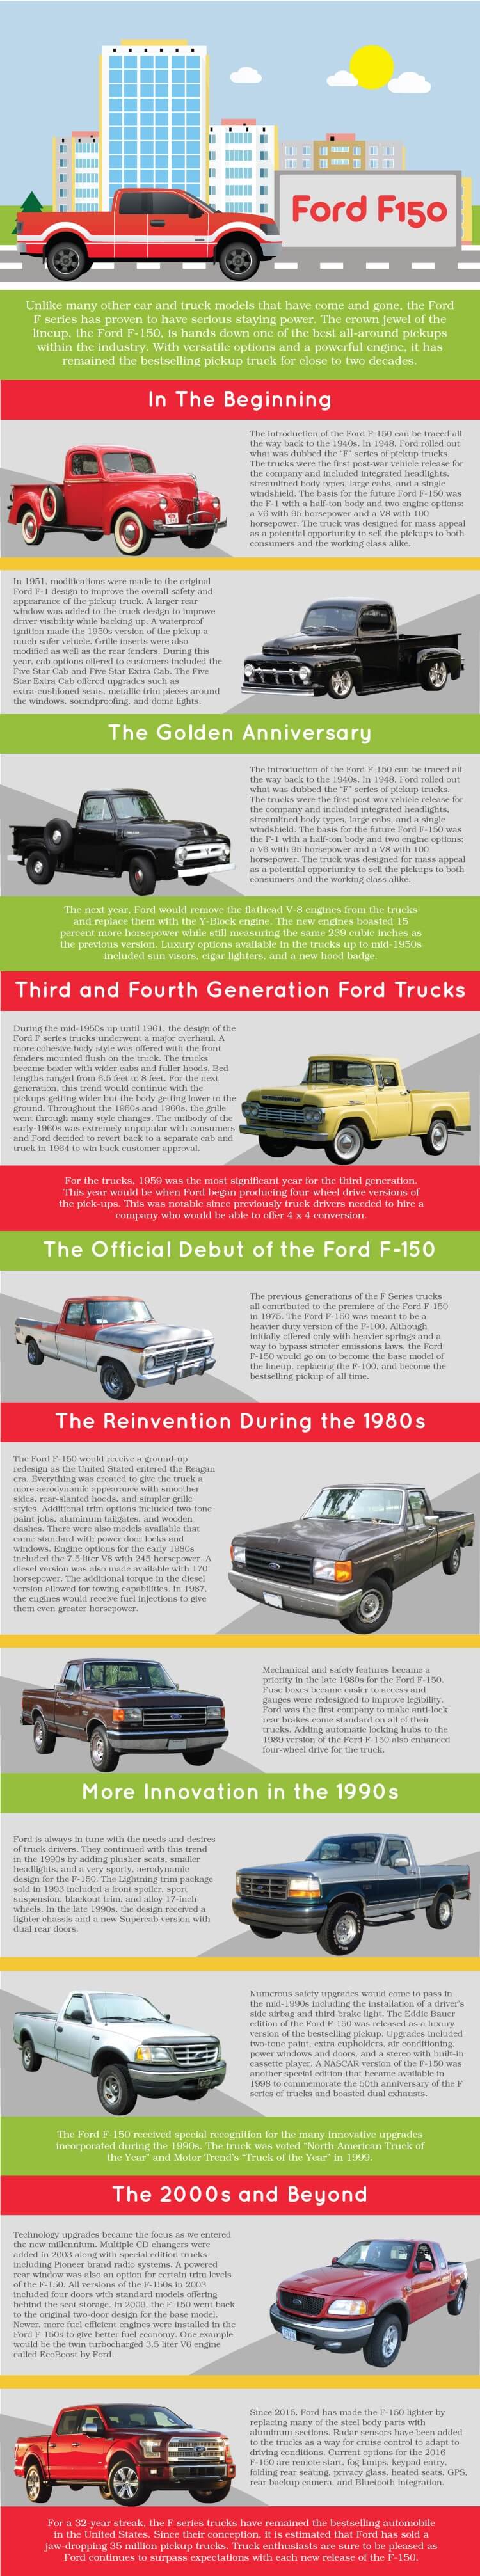 History of the Ford f150